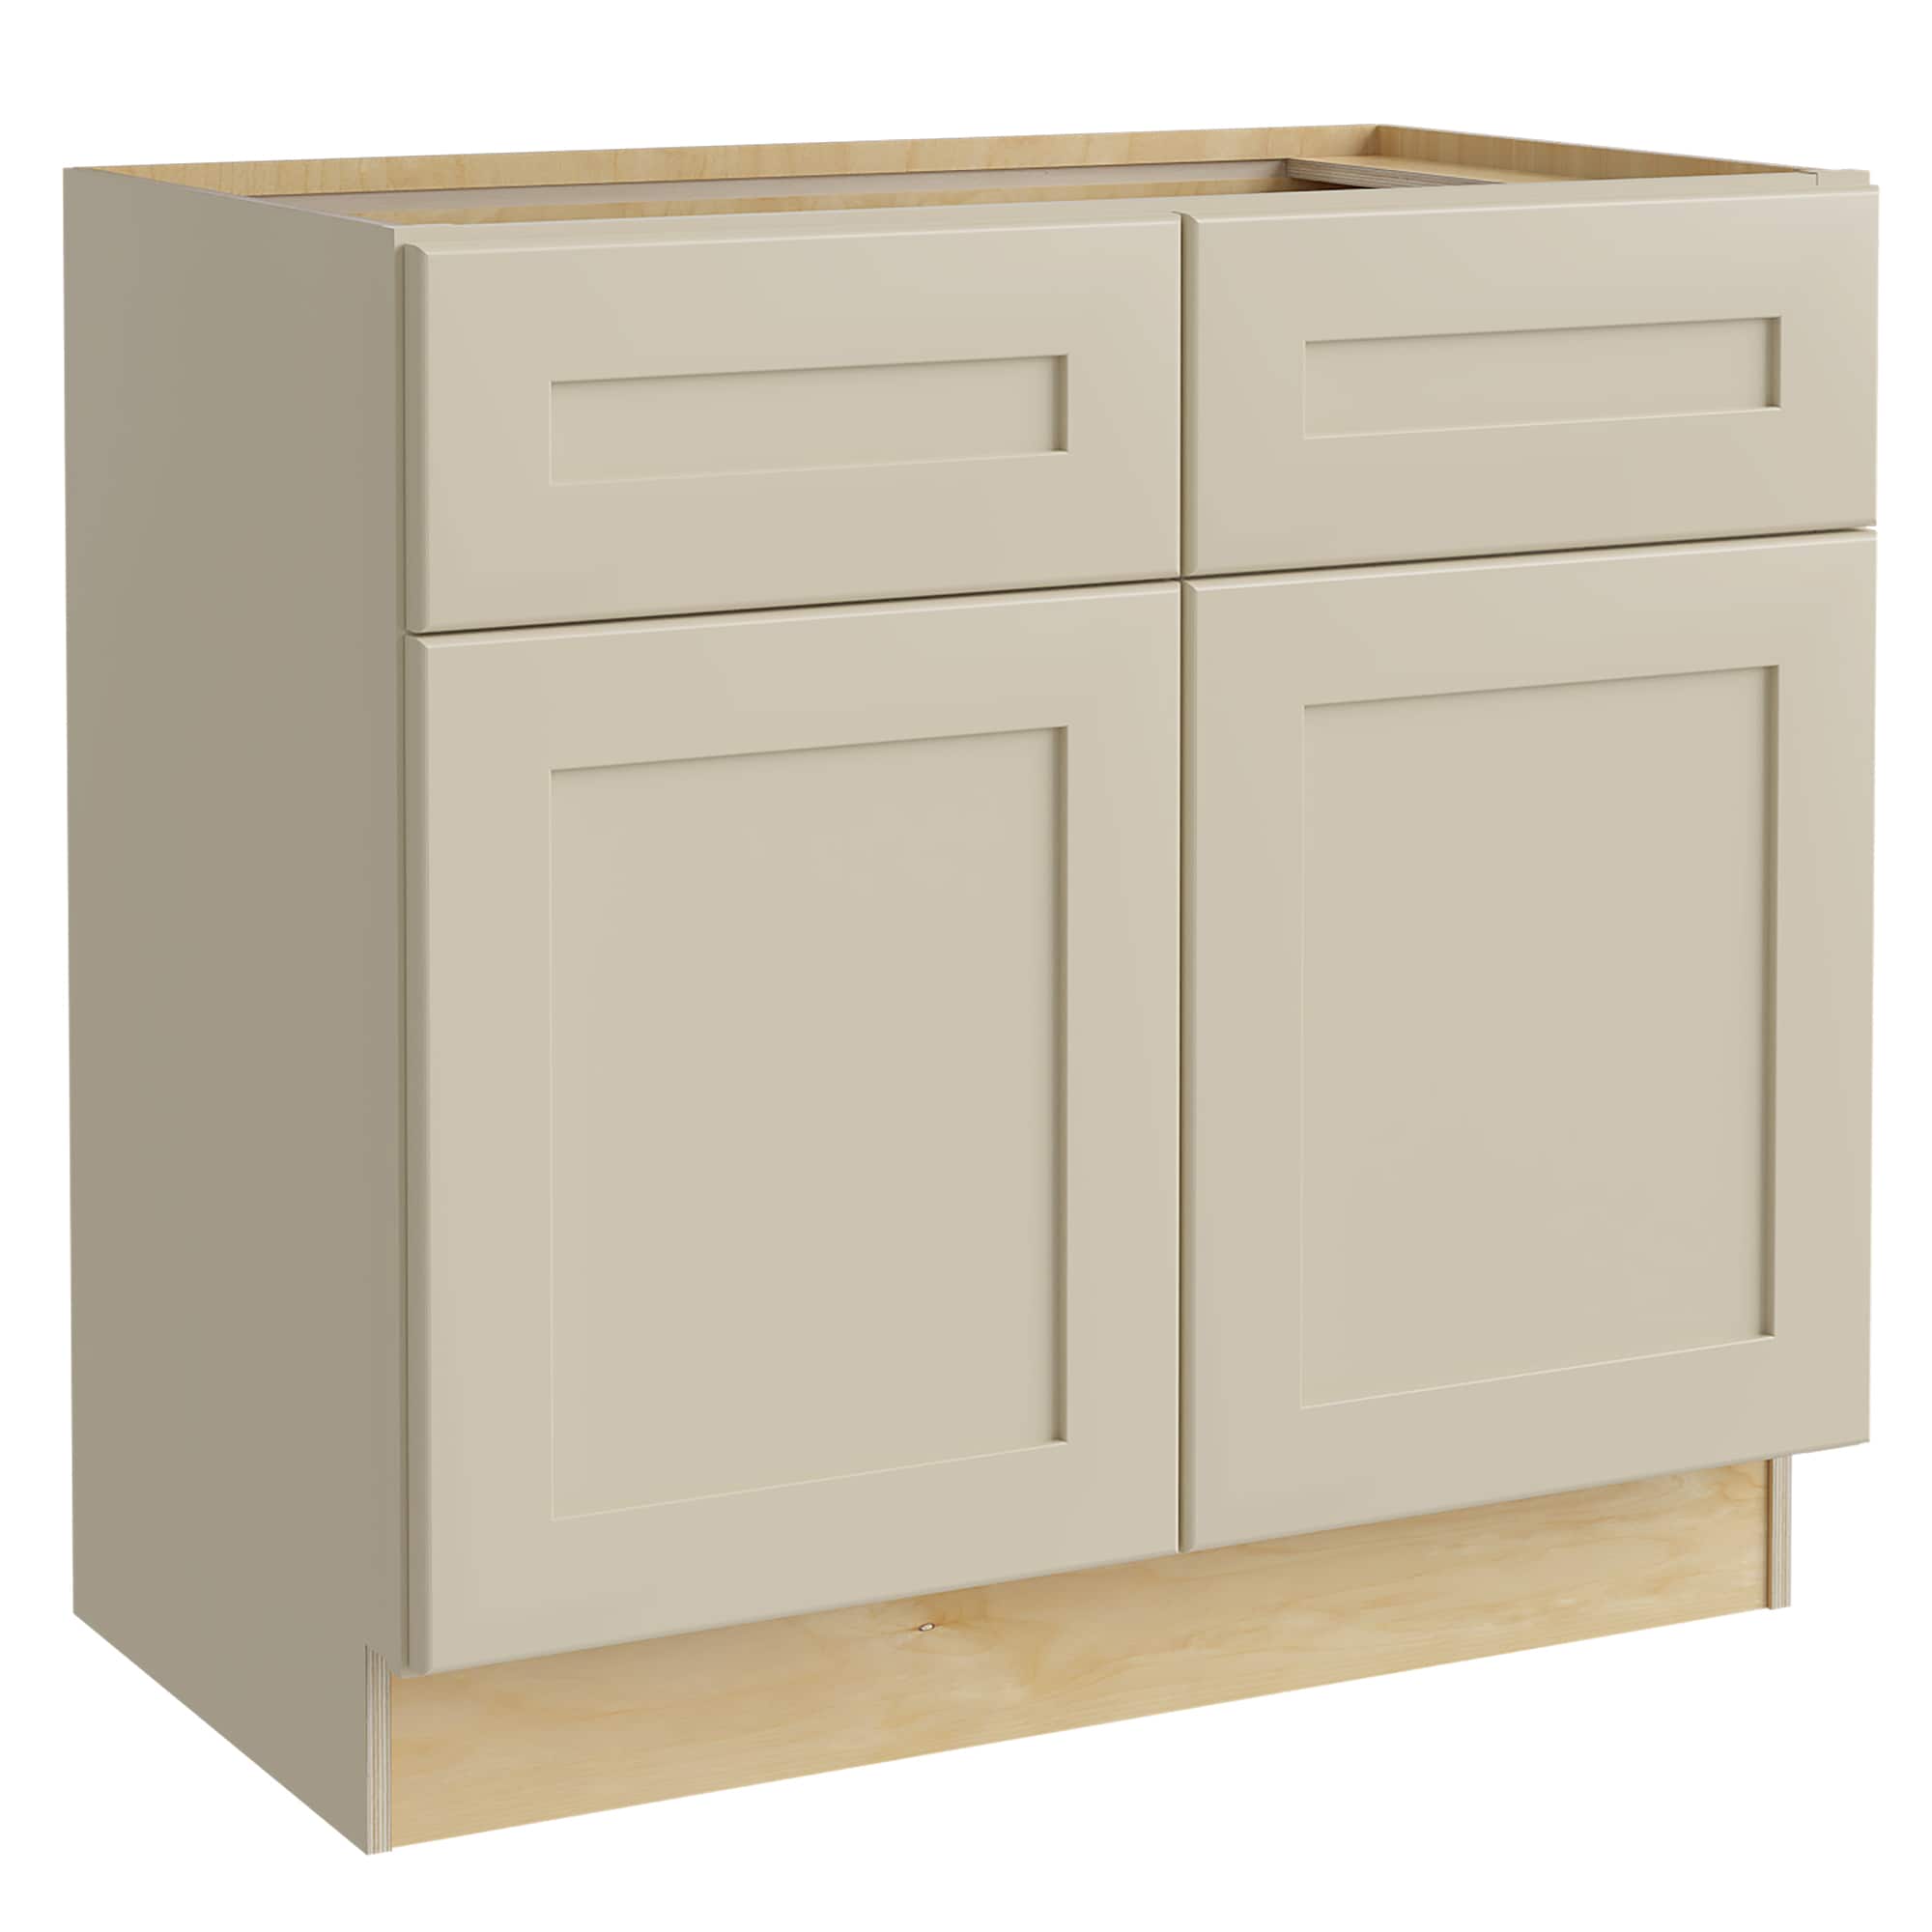 Luxxe Cabinetry 33-in W x 34.5-in H x 24-in D Norfolk Blended Cream Painted Sink Base Fully Assembled Semi-custom Cabinet in Off-White | SB33-NBC